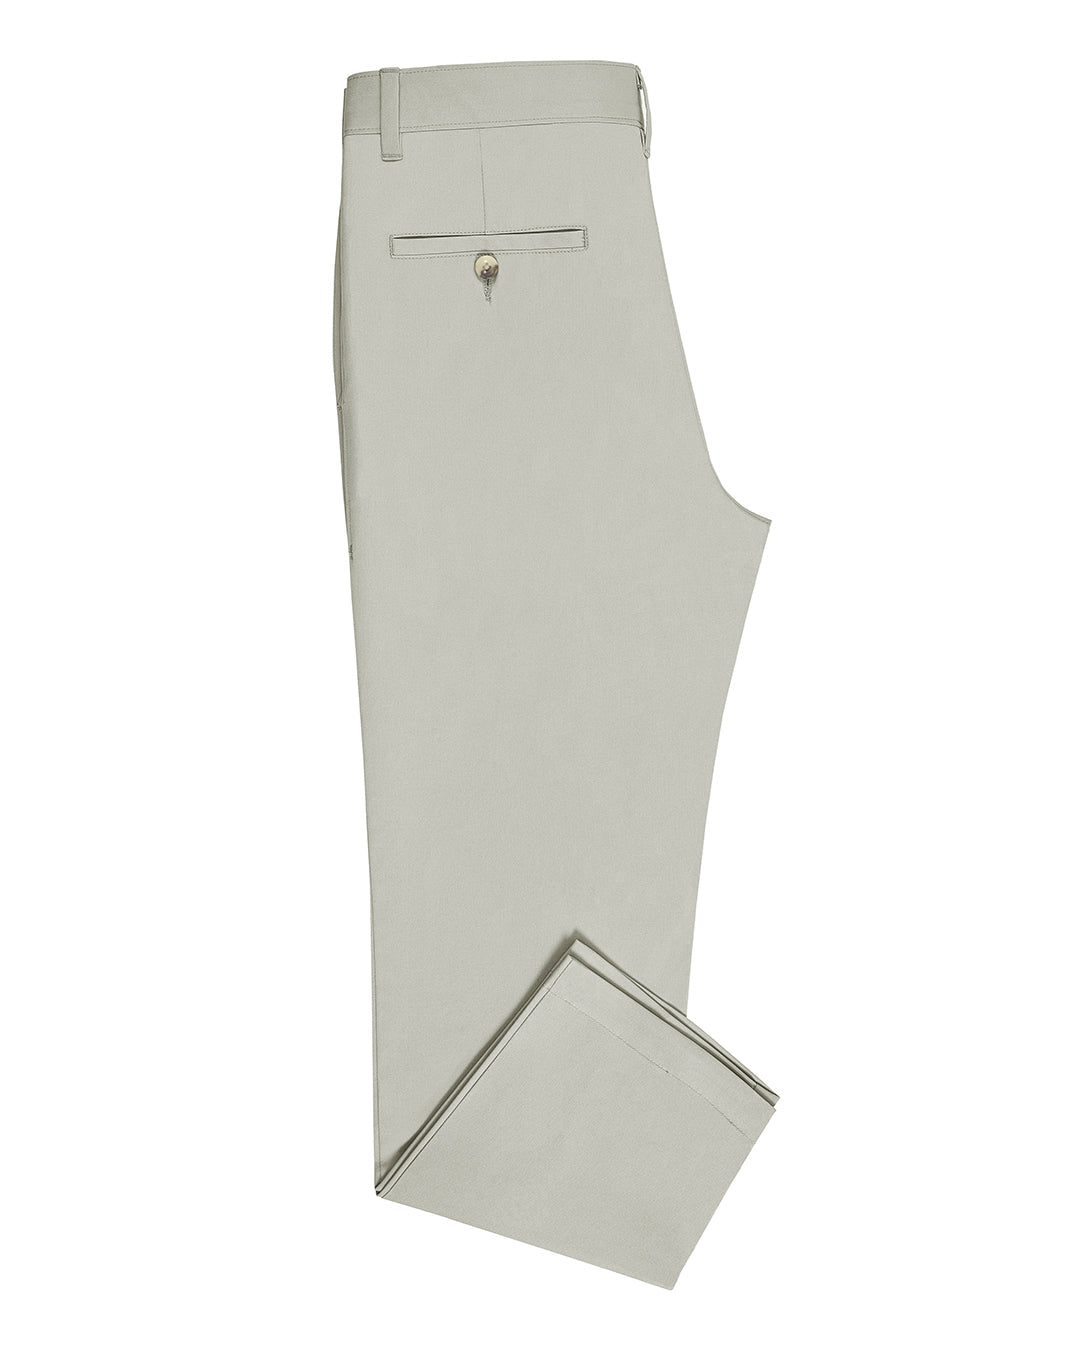 Side view of custom Genoa Chino pants for men by Luxire in pale green